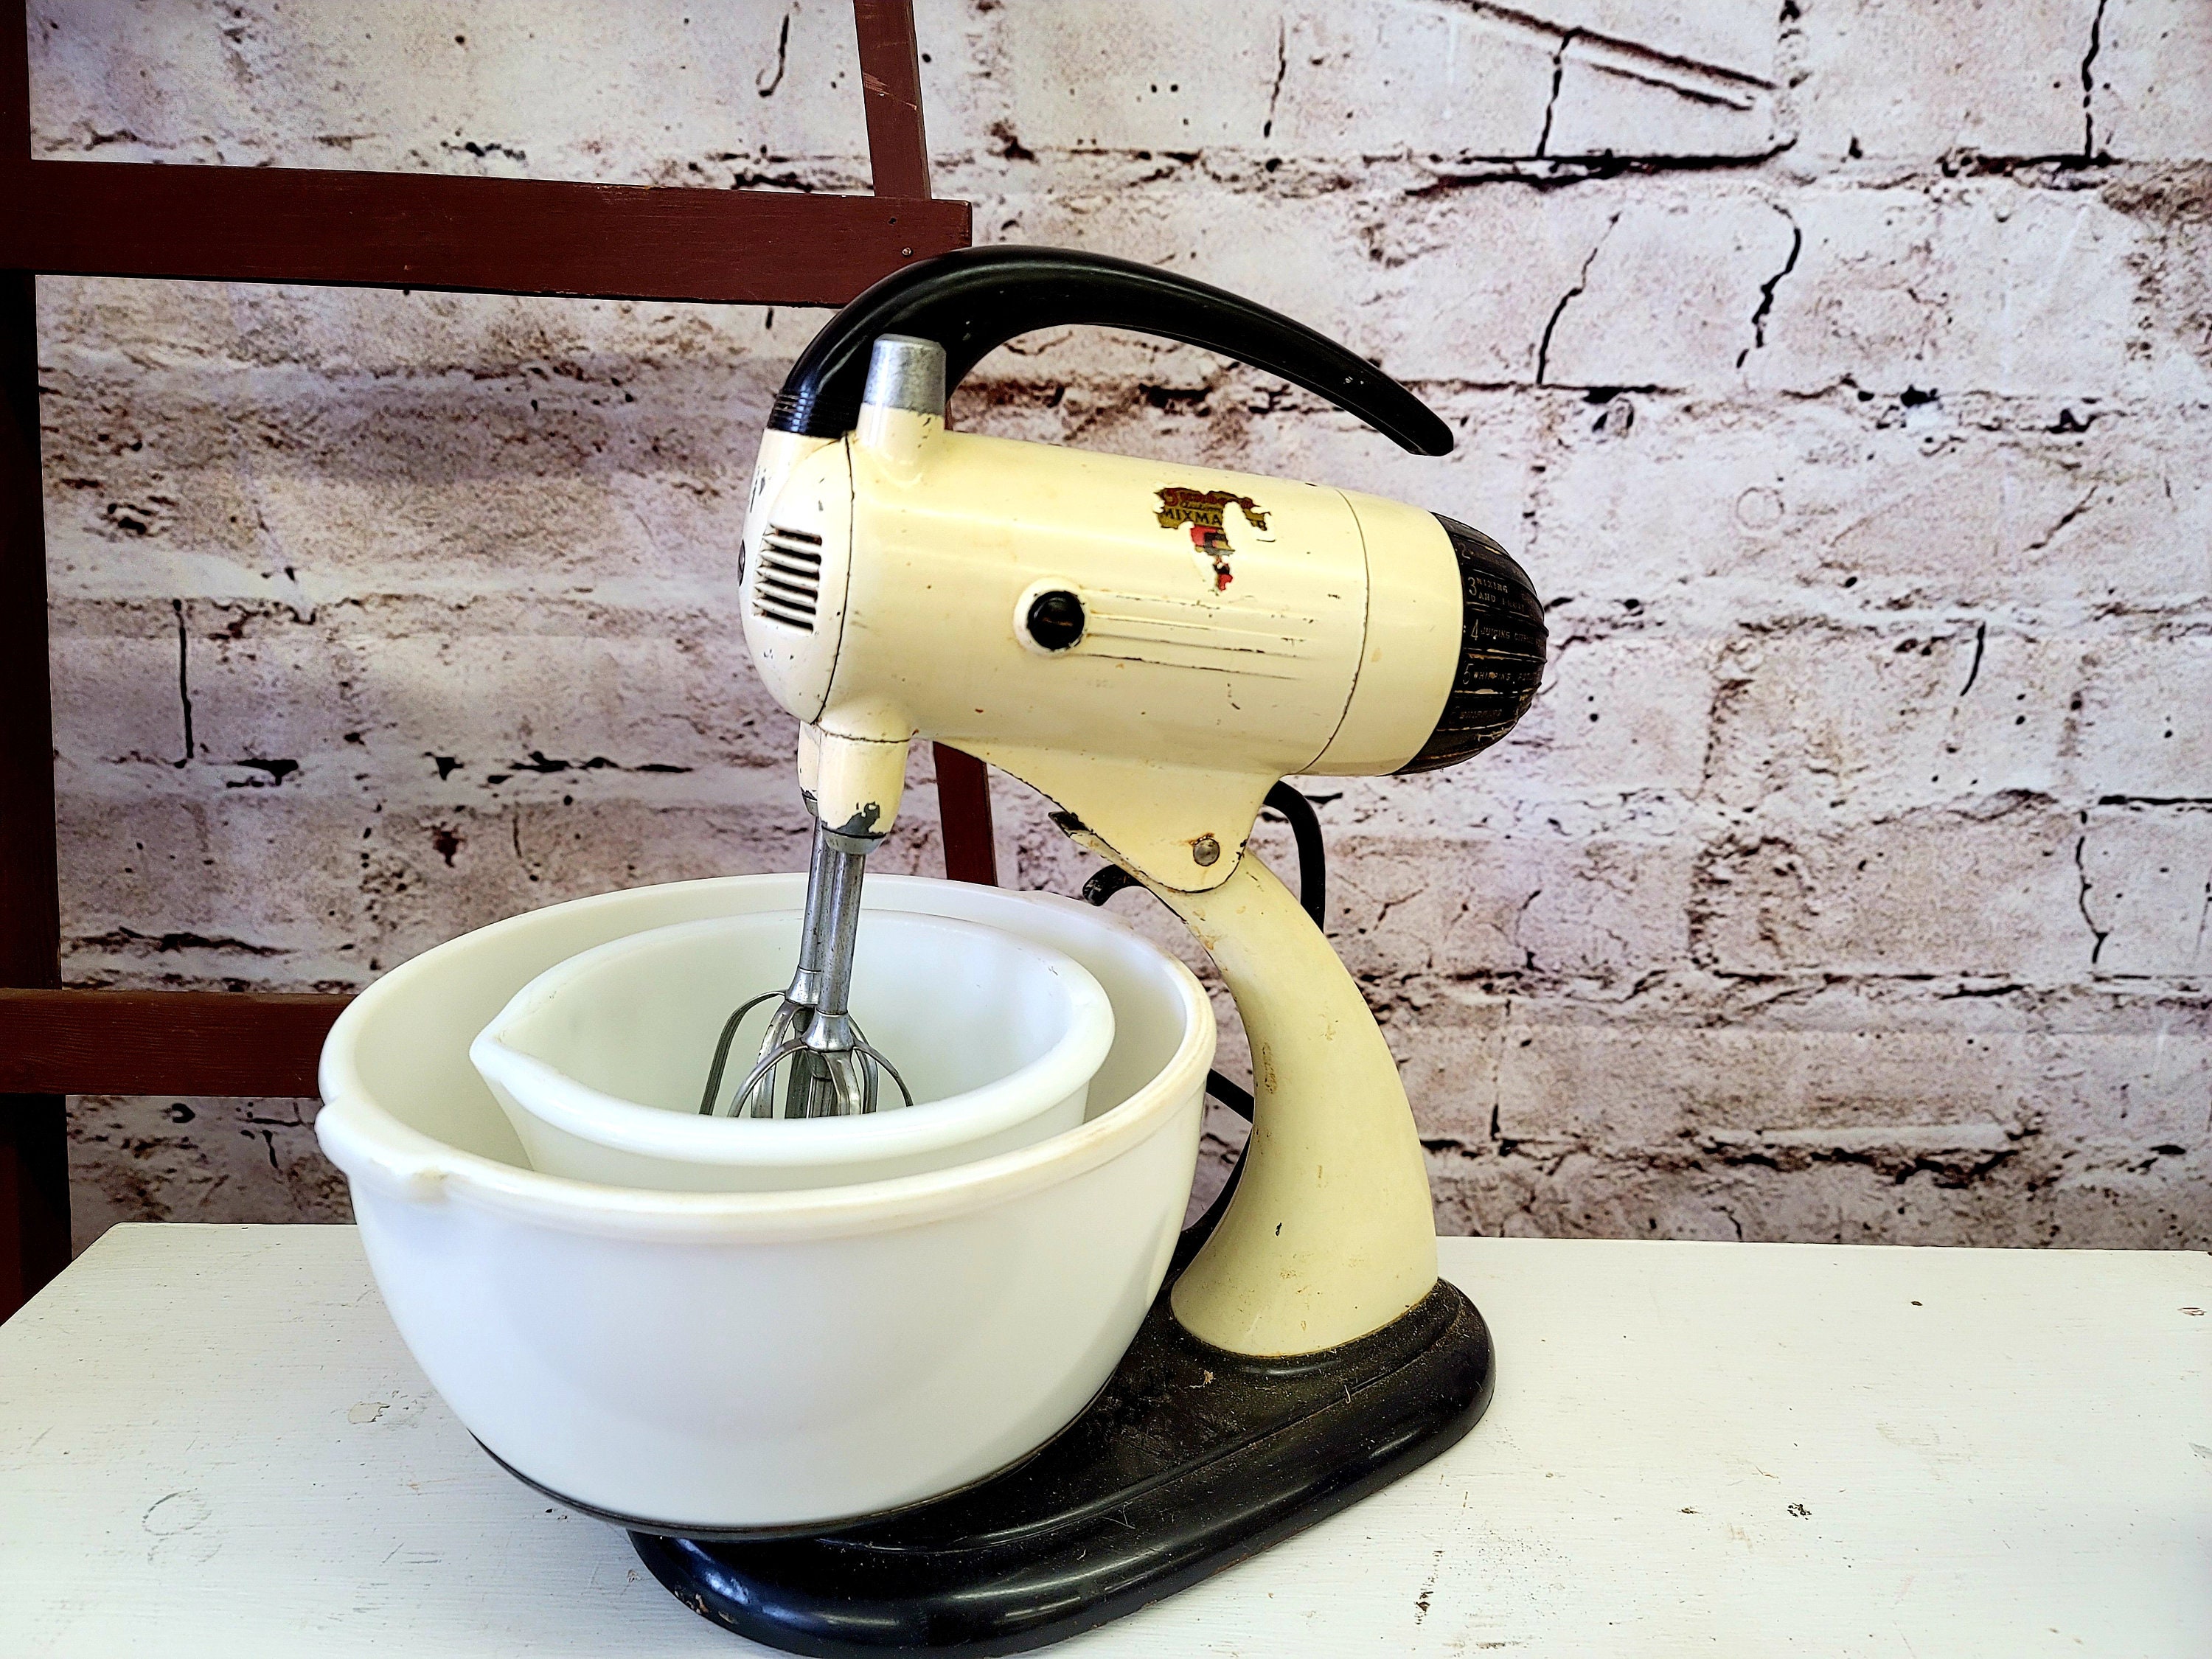 Mid Century Hamilton Beach Model G Mixguide Stand Mixer With Removable Hand  Mixer, Includes 2 Pyrex Mixing Bowls 